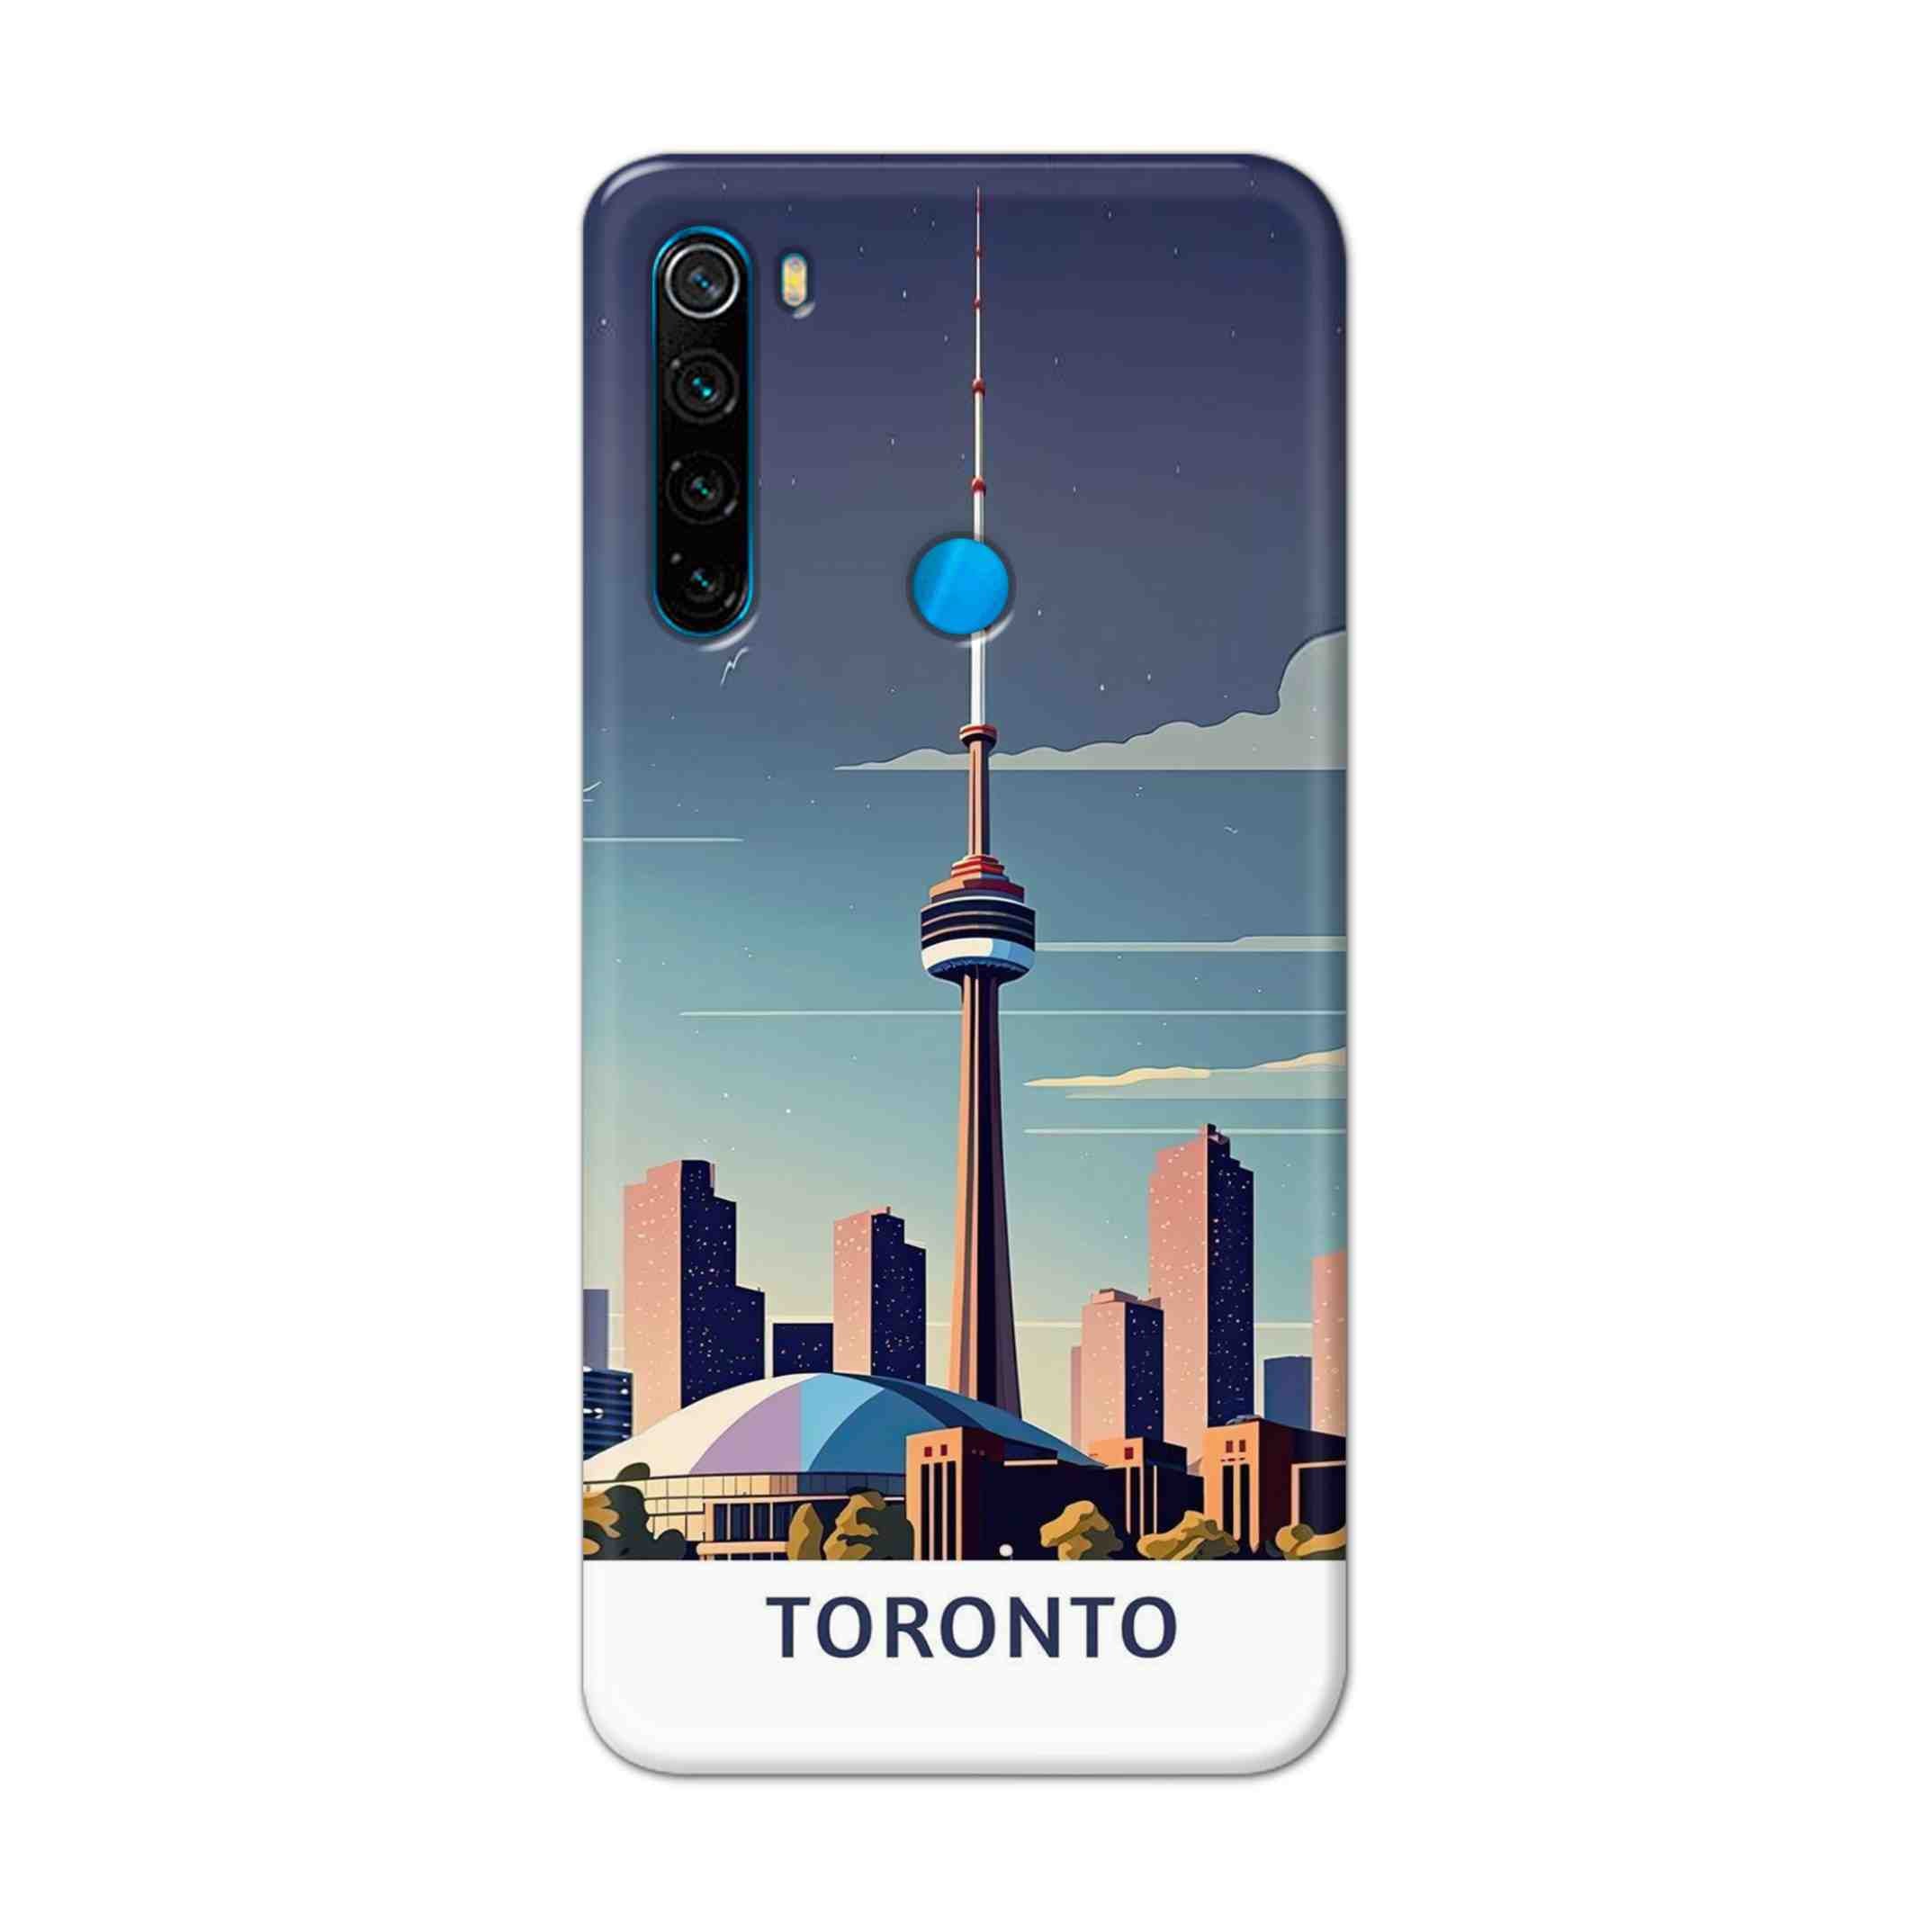 Buy Toronto Hard Back Mobile Phone Case Cover For Xiaomi Redmi Note 8 Online